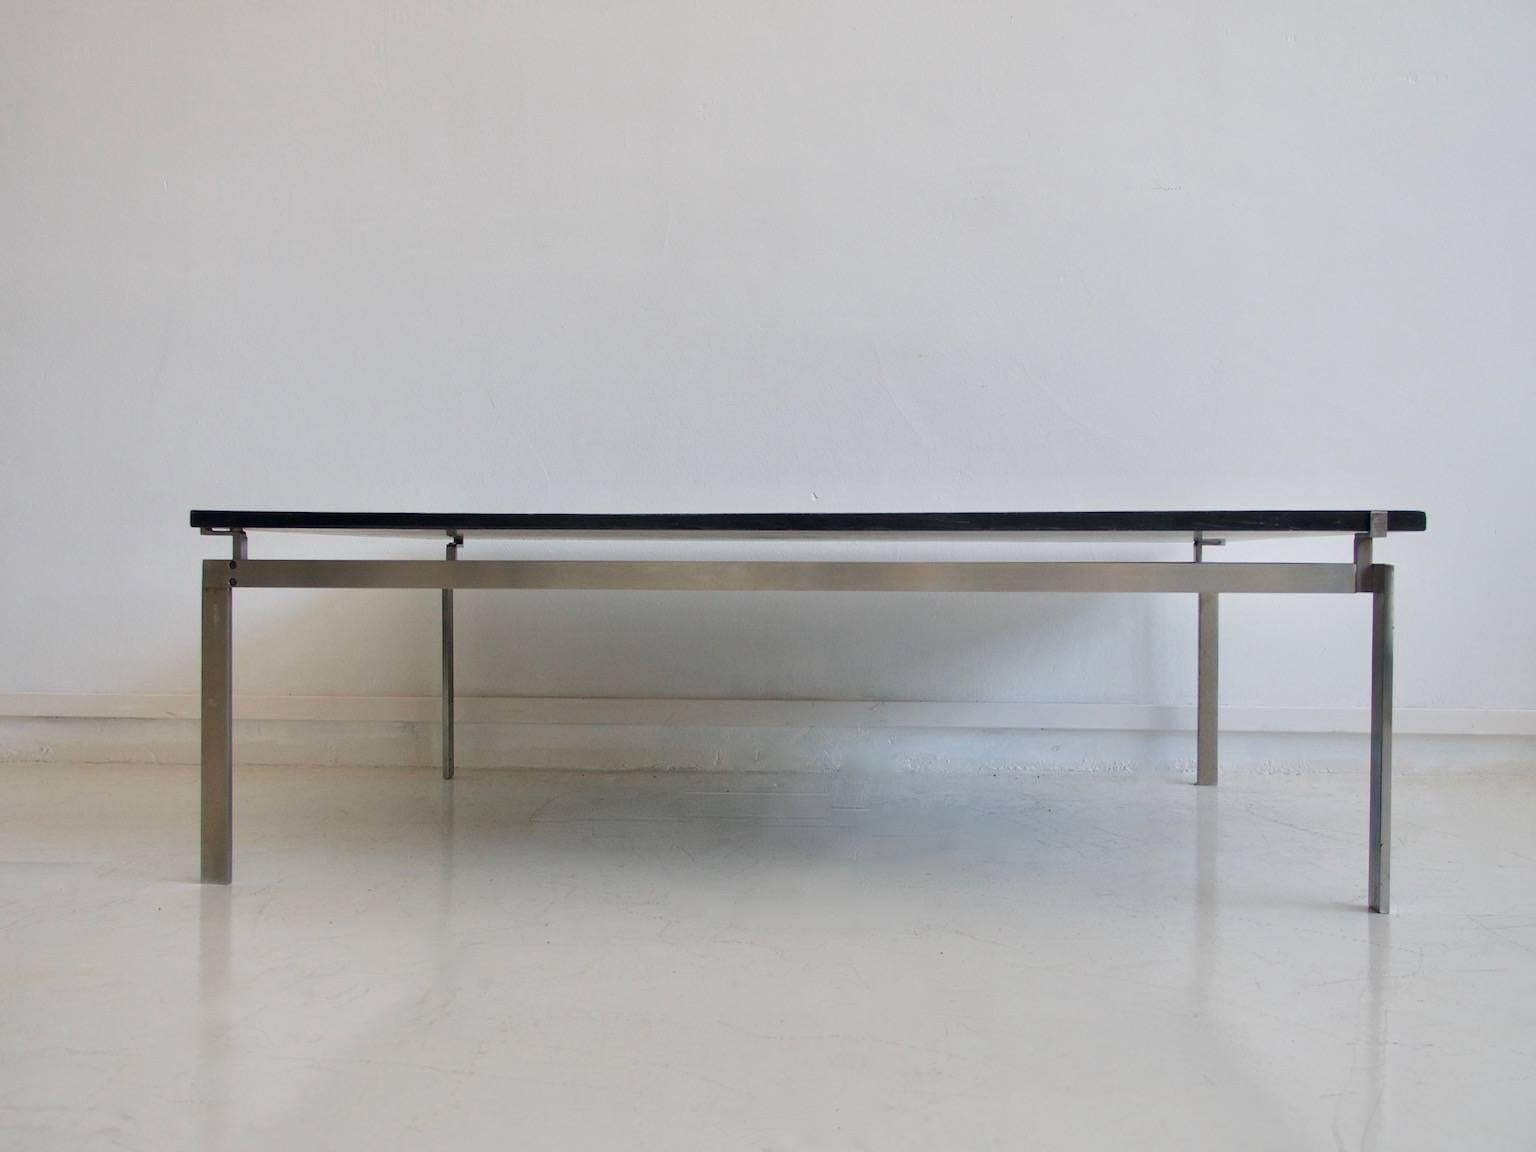 Large coffee table in the style of Poul Kjaerholm, 1960s-1970s. Construction of chromium-plated steel frame and loose black slate table top treated with oil.